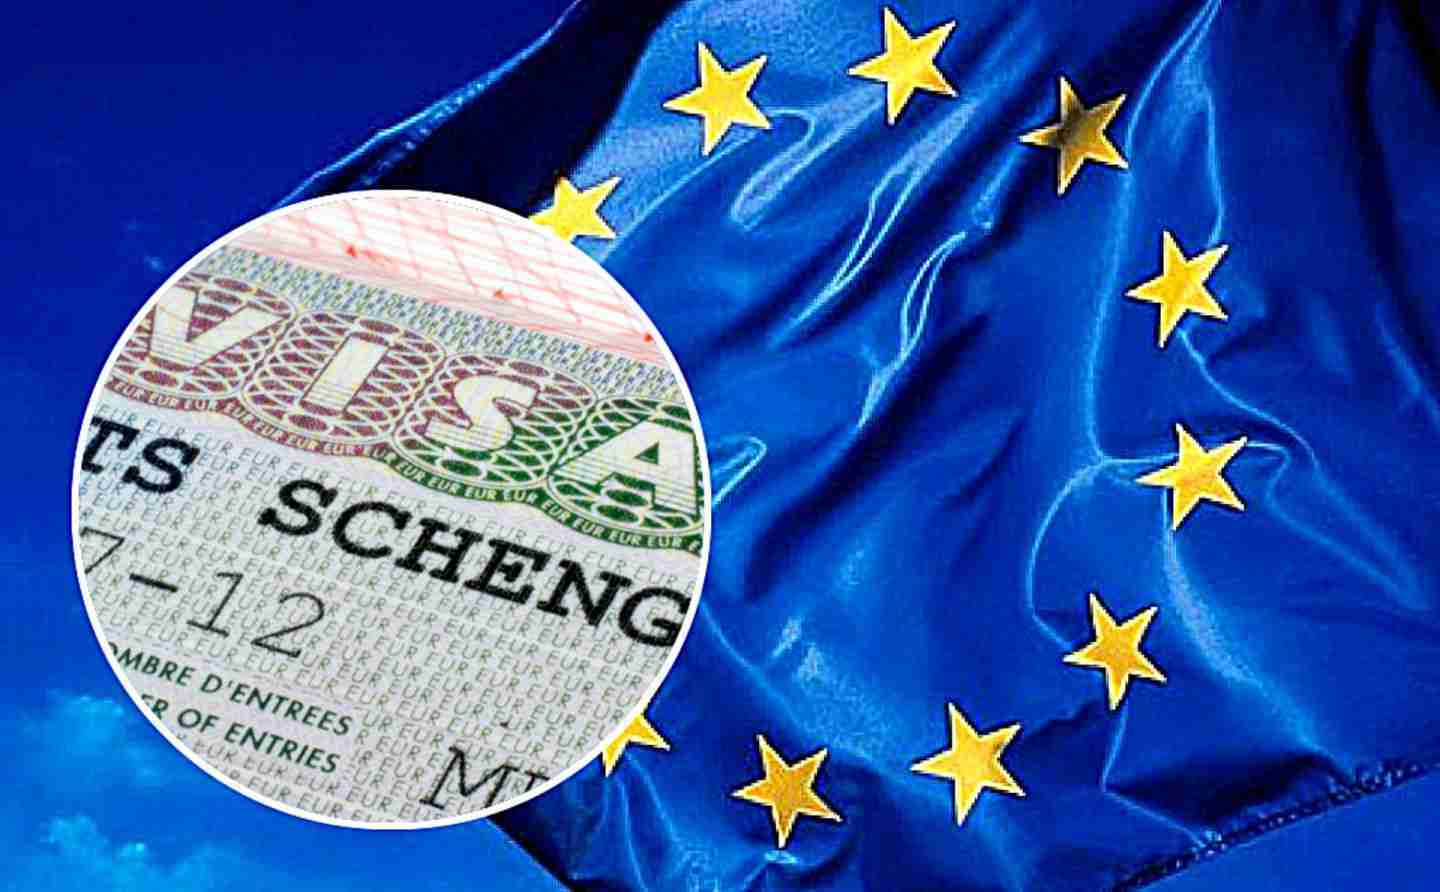 Simpler Schengen visas rules for Indians to boost travel to Europe